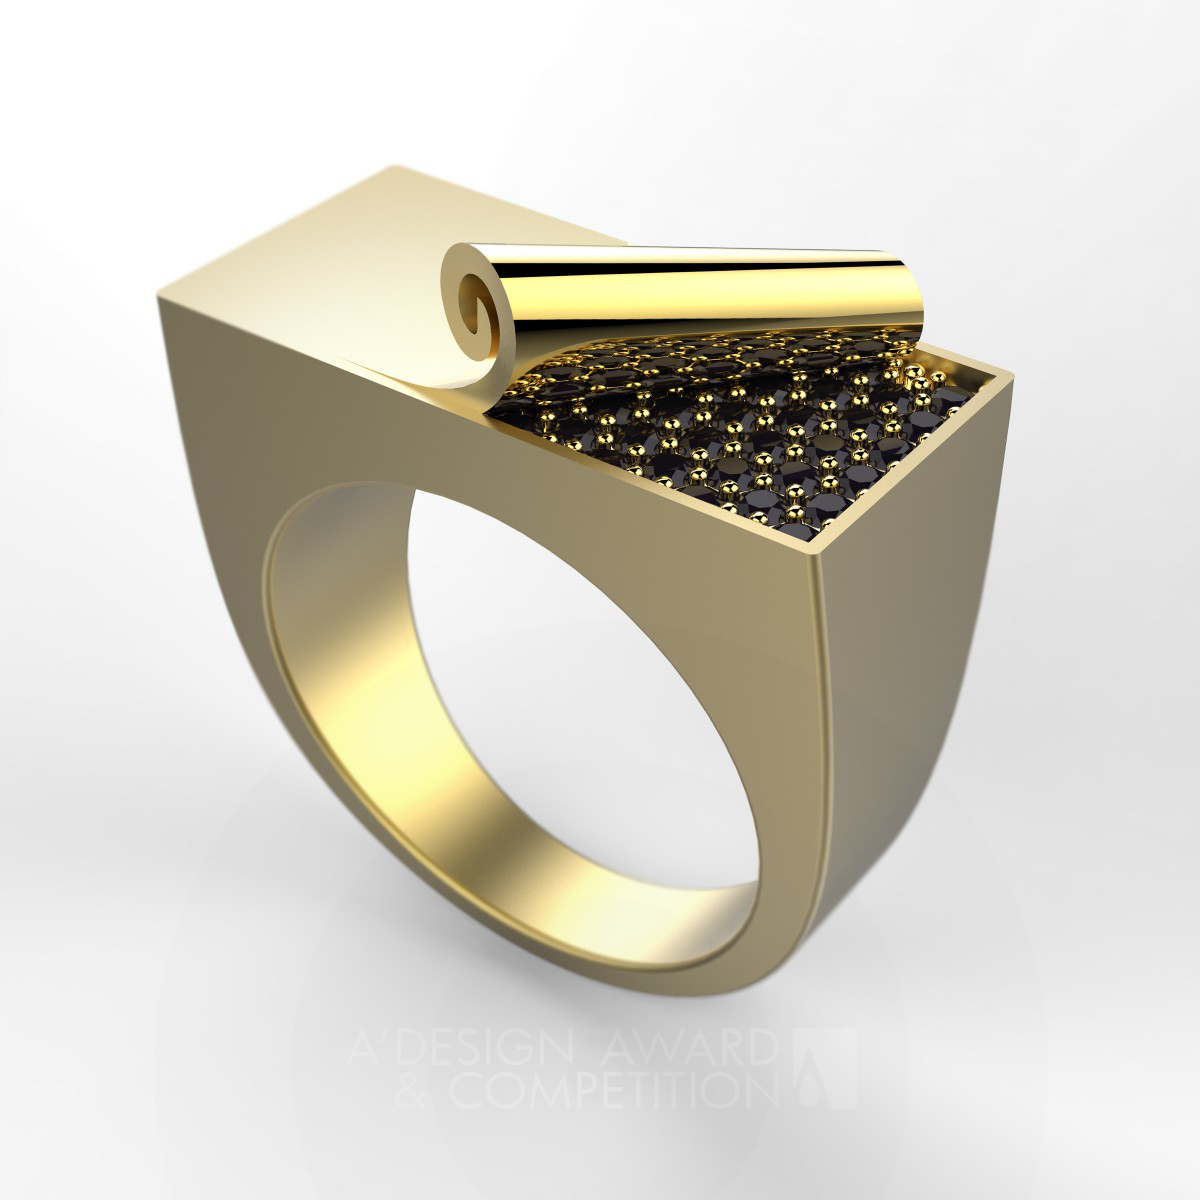 UnveilRing Ring by Mohammad Mirzamohammadi